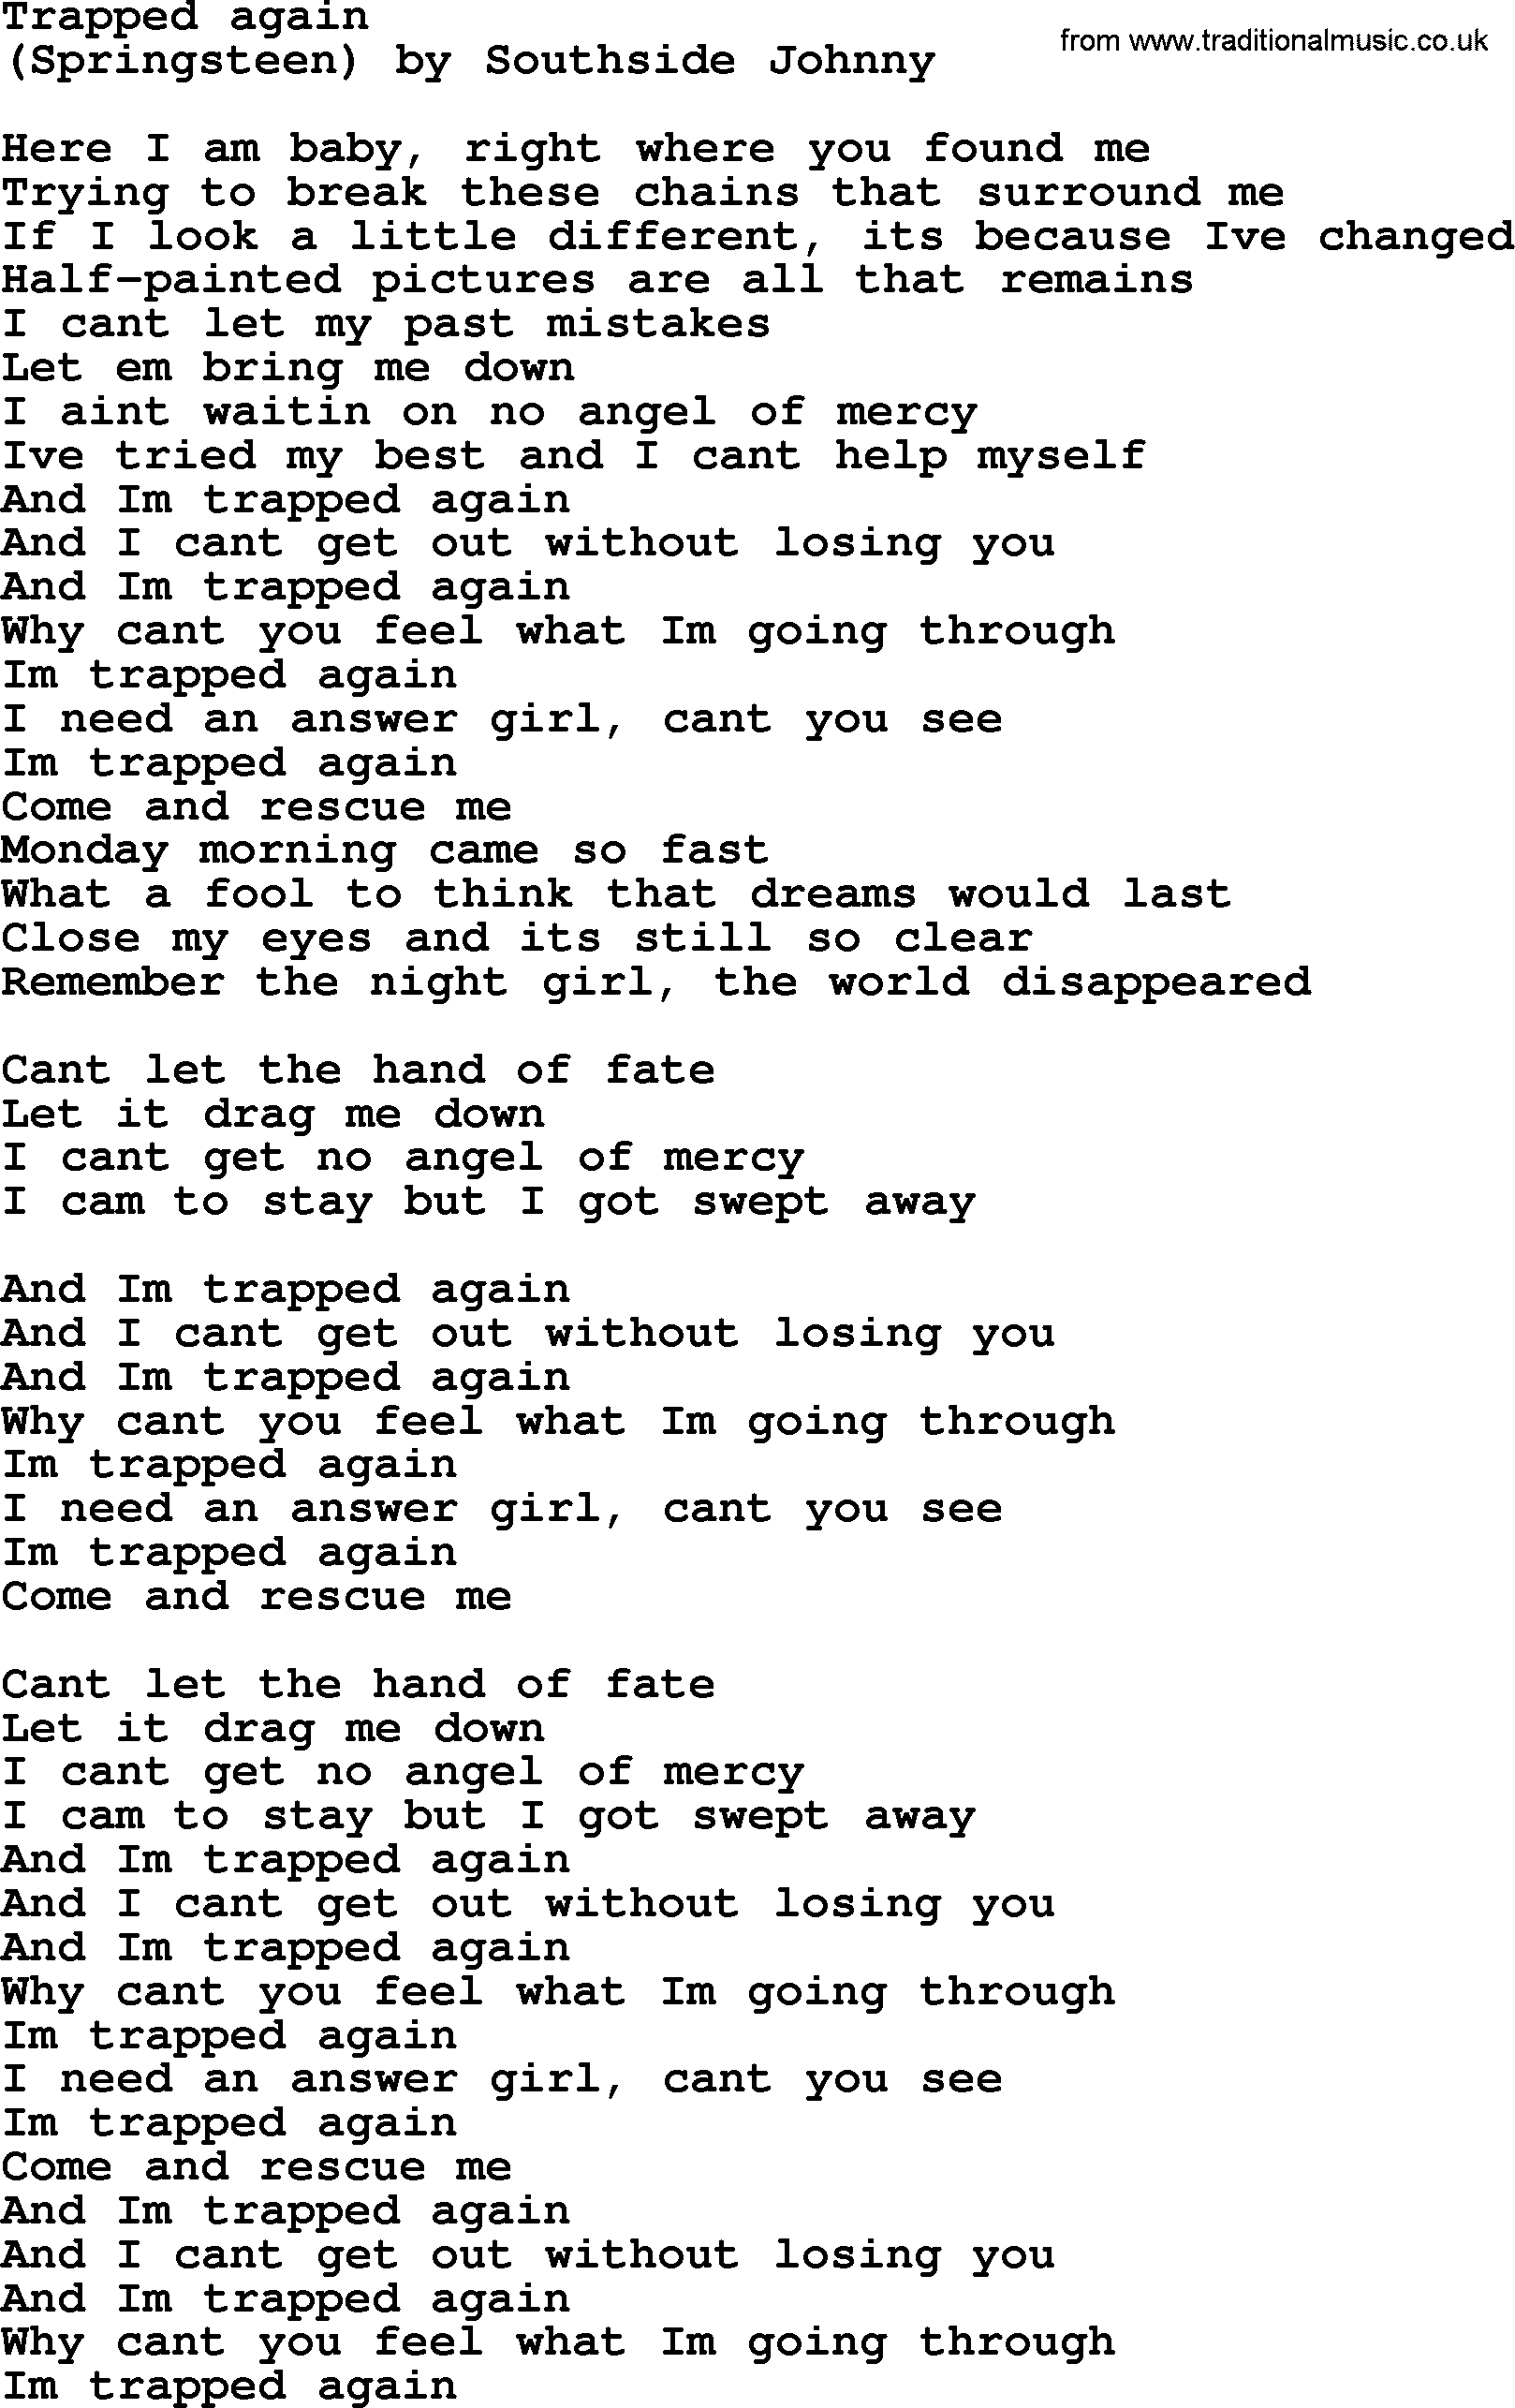 Bruce Springsteen song: Trapped Again lyrics